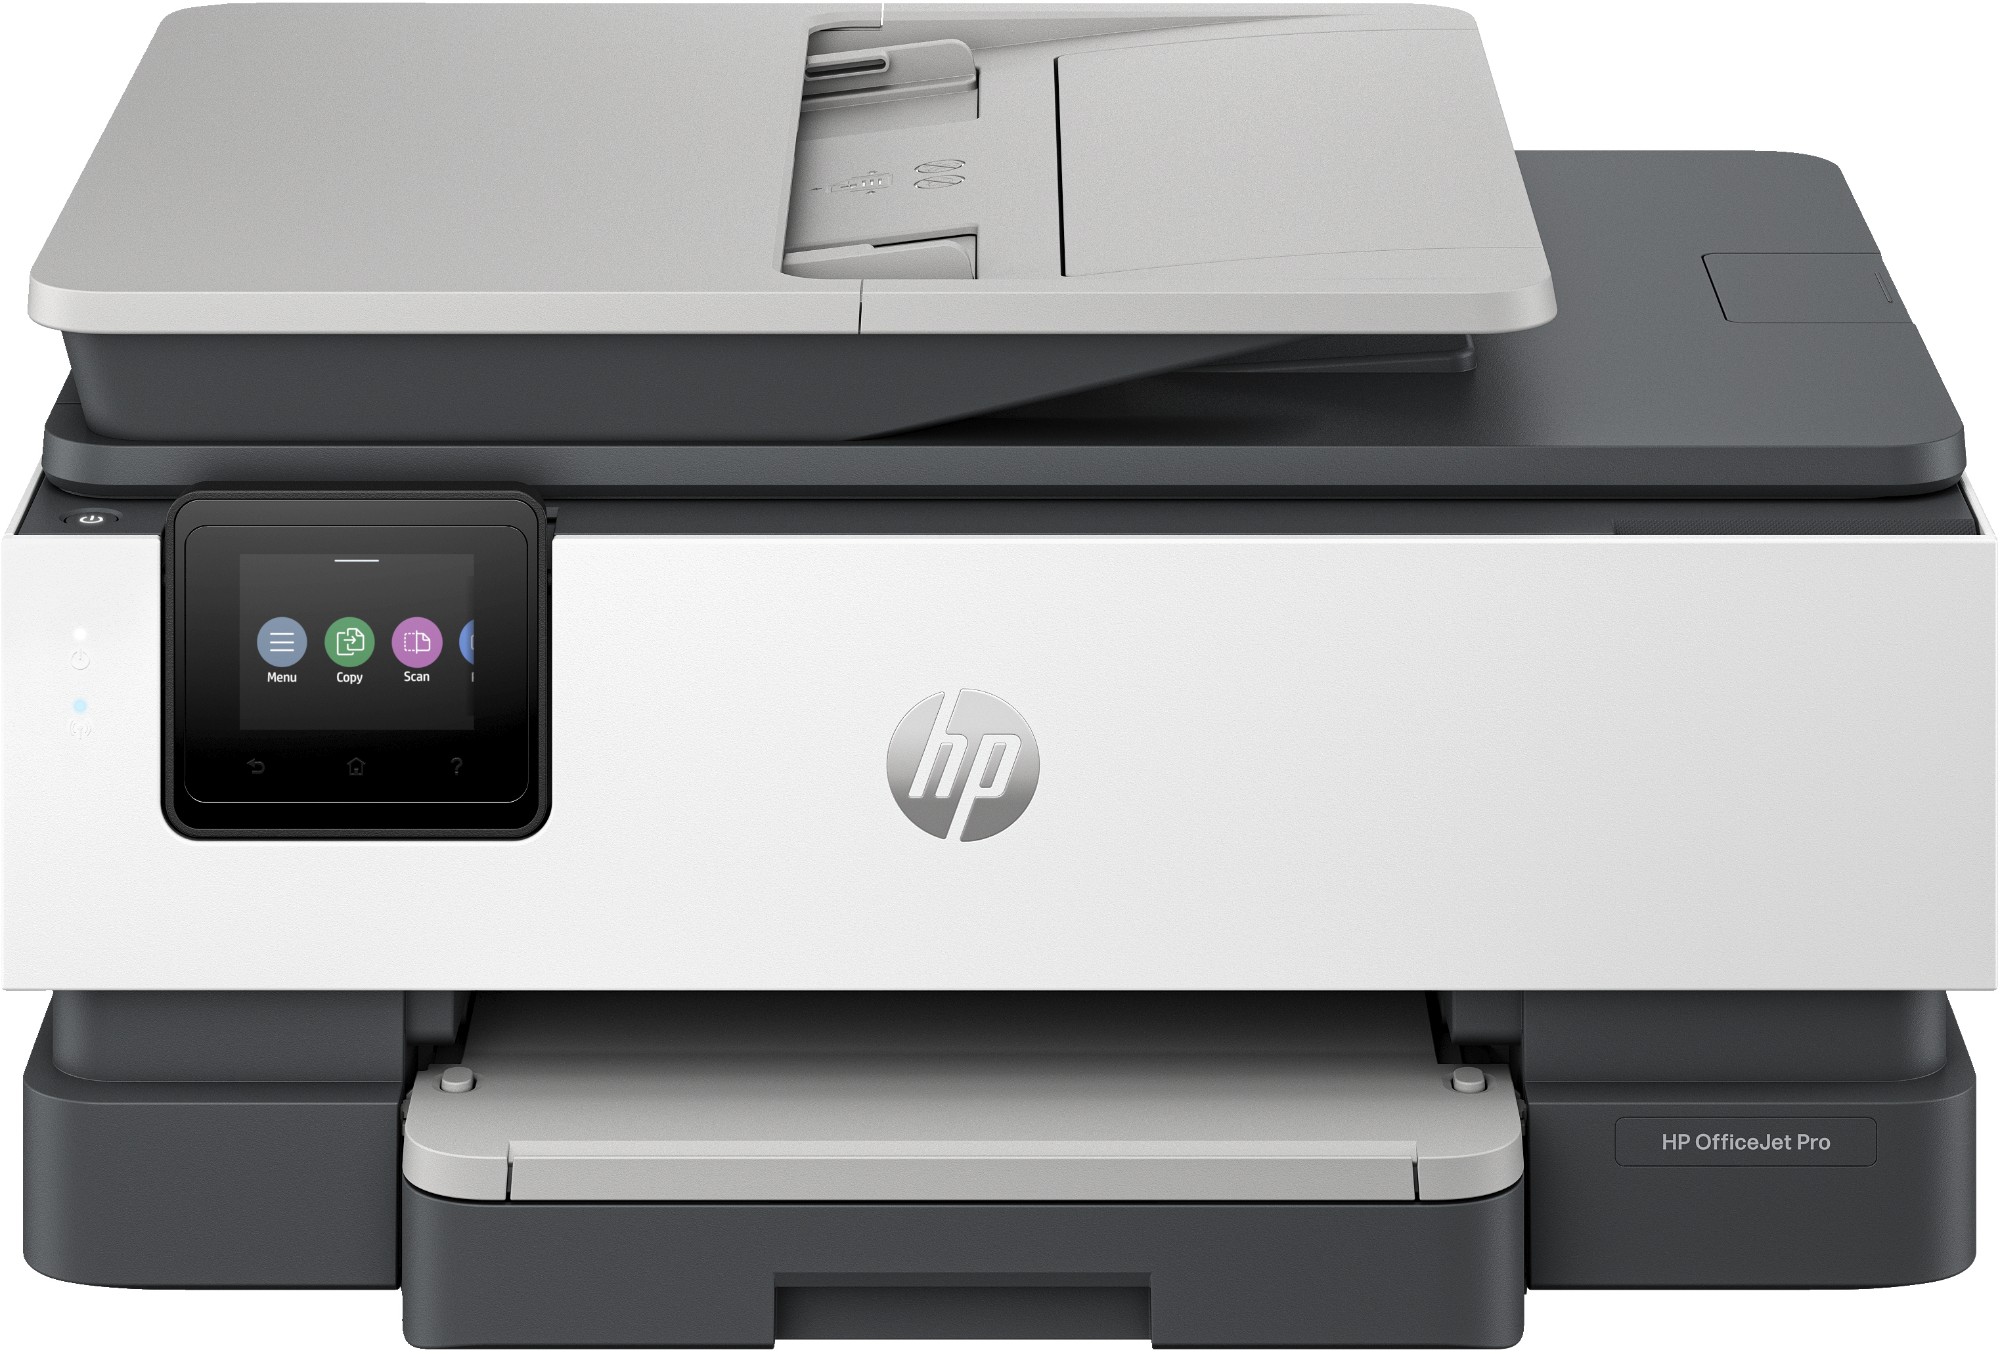 HP OfficeJet Pro HP 8122e All-in-One Printer, Colour, Printer for Home, Print, copy, scan, Automatic document feeder; Touchscreen; Smart Advance Scan; Quiet mode; Print over VPN with HP+